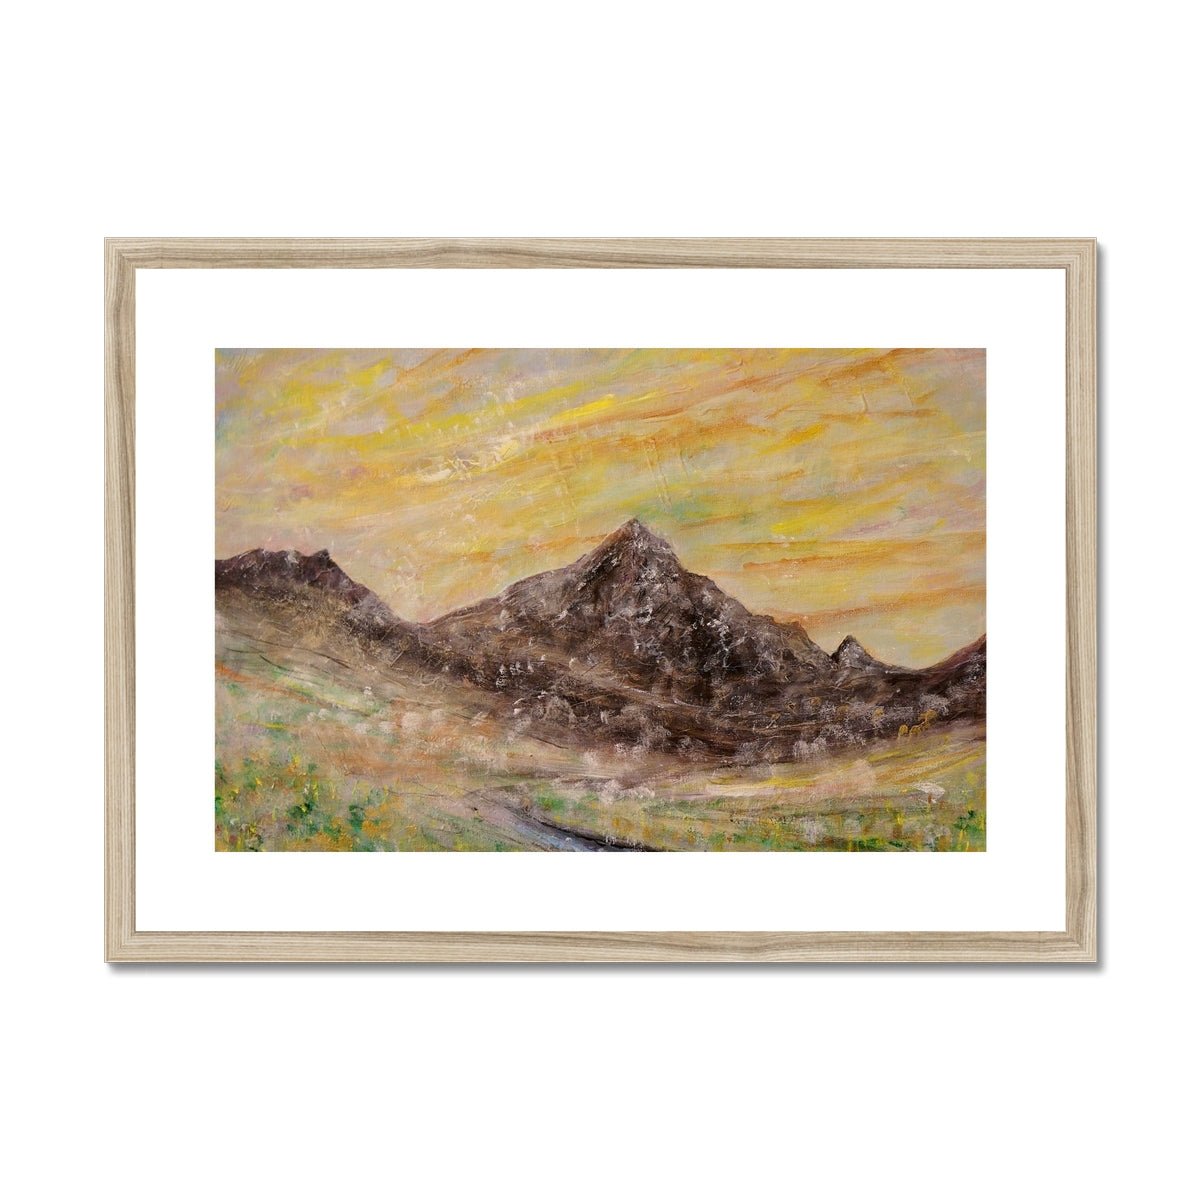 Glen Rosa Mist Painting | Framed & Mounted Prints From Scotland-Framed & Mounted Prints-Arran Art Gallery-A2 Landscape-Natural Frame-Paintings, Prints, Homeware, Art Gifts From Scotland By Scottish Artist Kevin Hunter